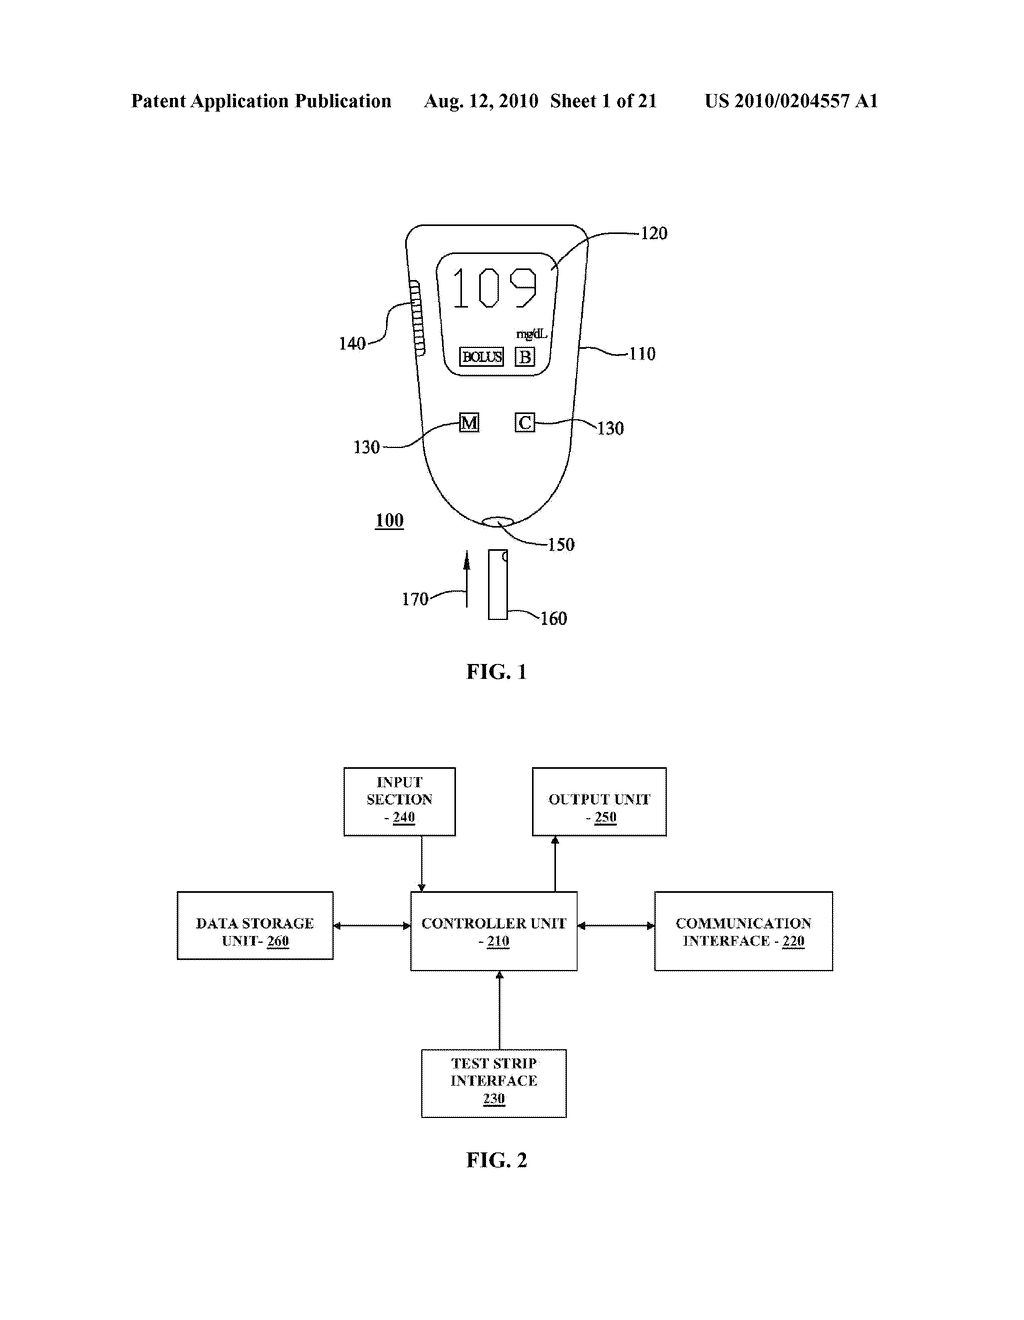 Multi-Function Analyte Test Device and Methods Therefor - diagram, schematic, and image 02